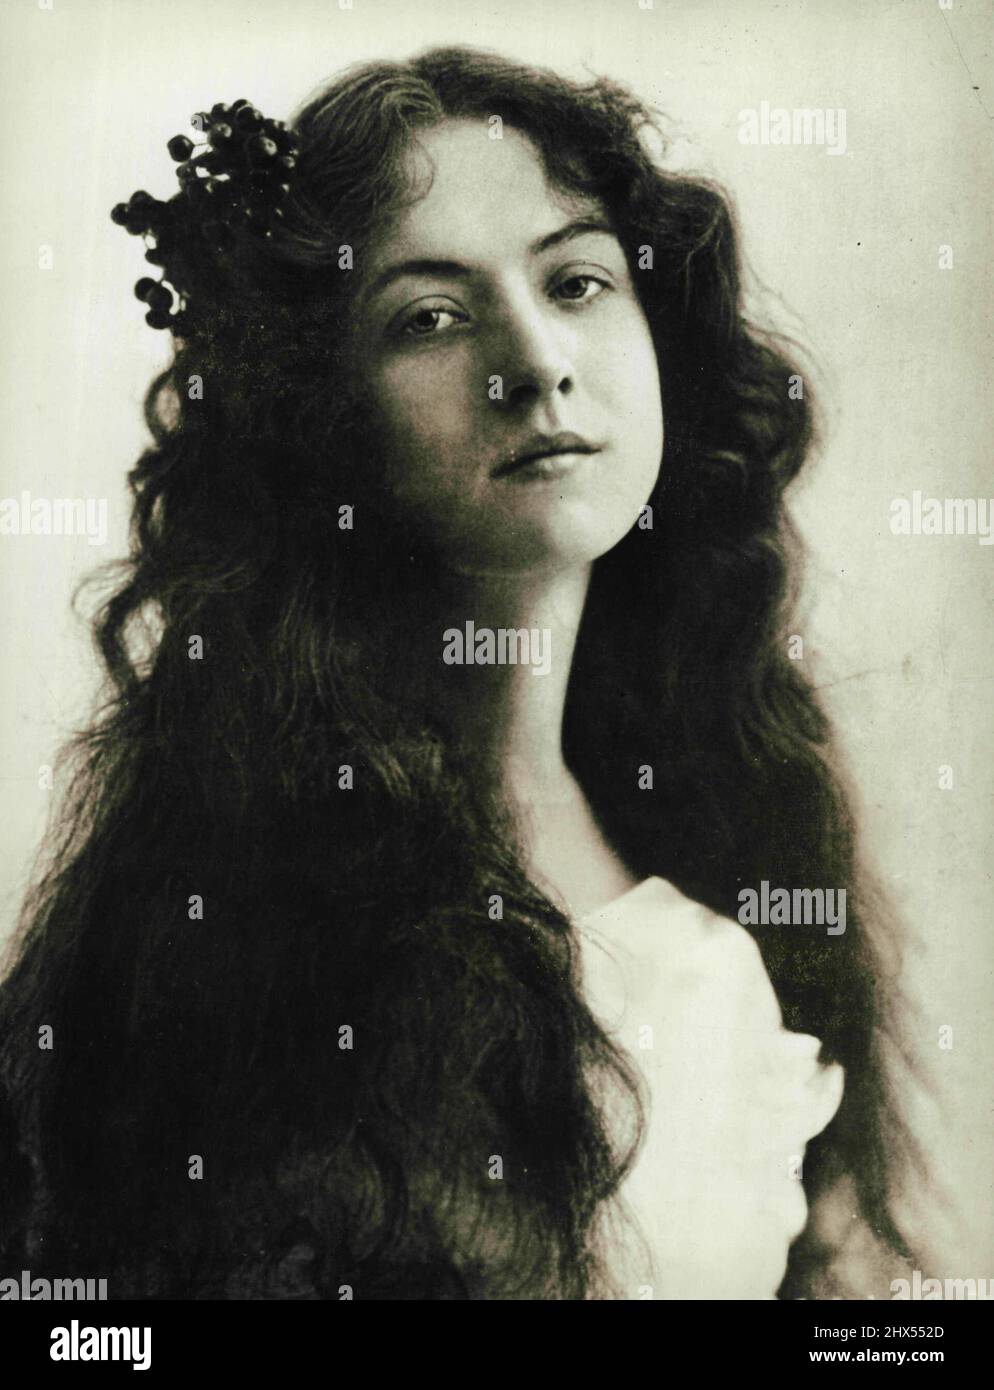 Beauty Triumphs. - 'Innocence' - another type that appealed in 1902. One of 24 beauty queens selected in the first photographic beauty contest ever held - it was staged by a noted Paris magazine in 1902. November 16, 1950. (Photo by Schoenfeld Collection of Camera Features). Stock Photo